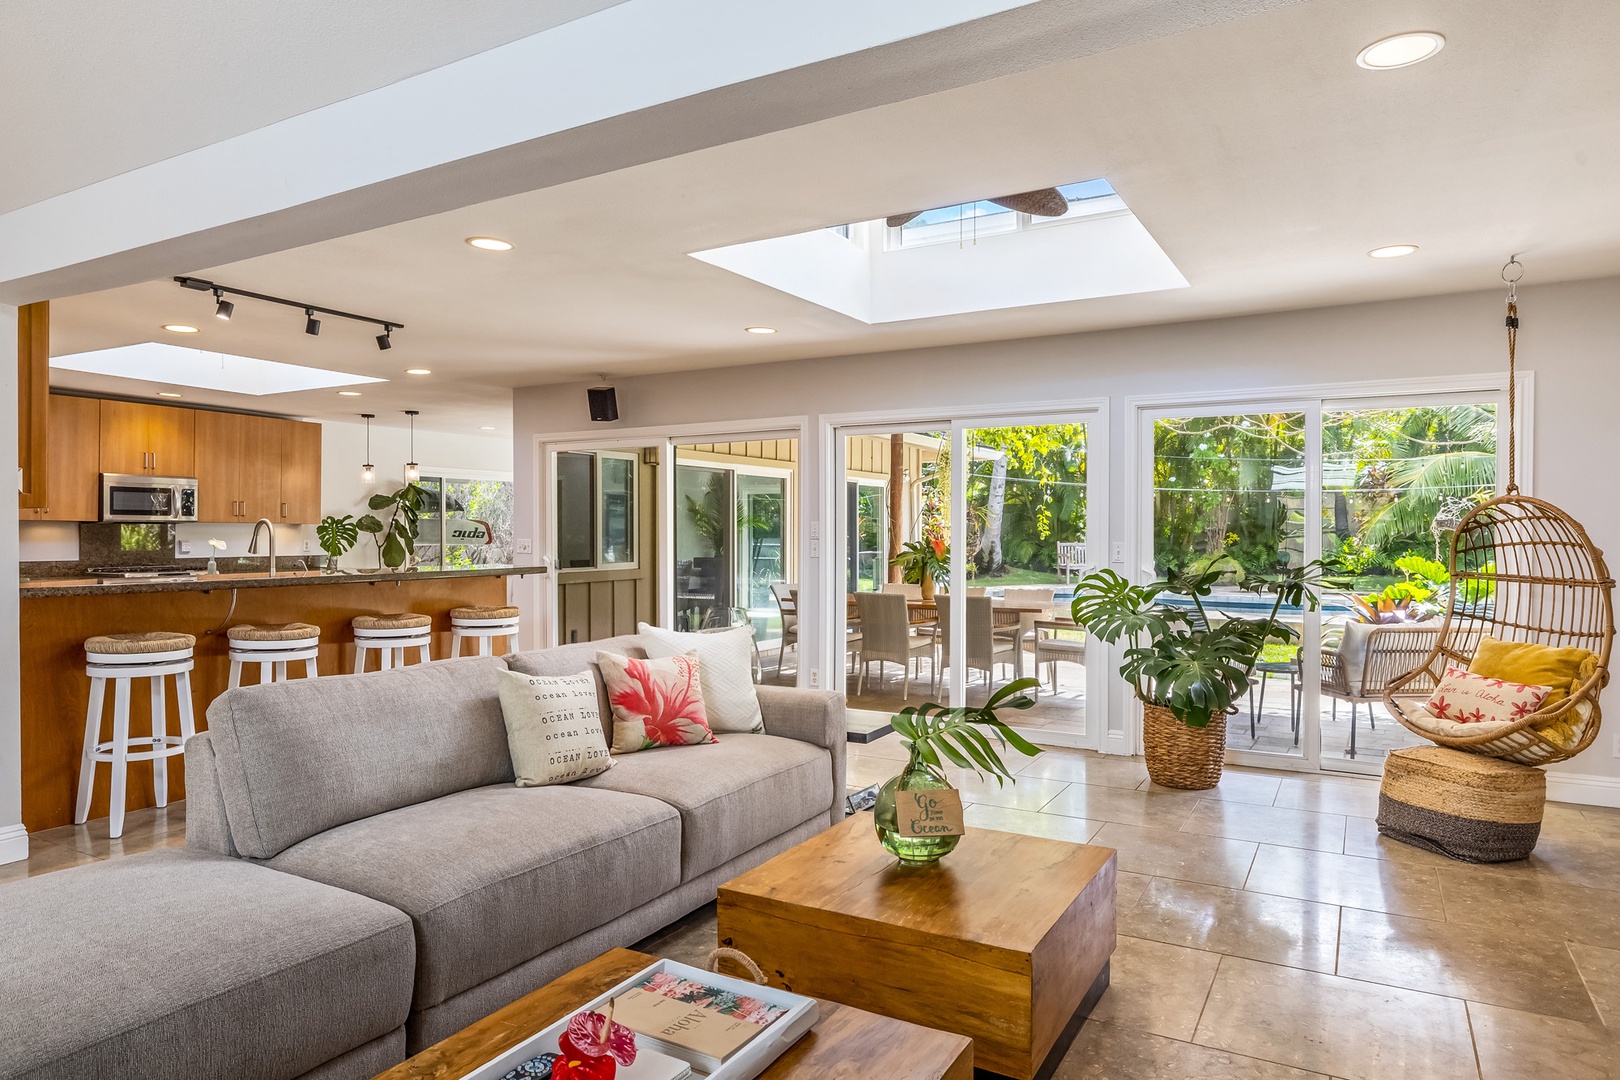 Honolulu Vacation Rentals, Hale Ho'omaha - The living area opens directly to the lanai and pool deck